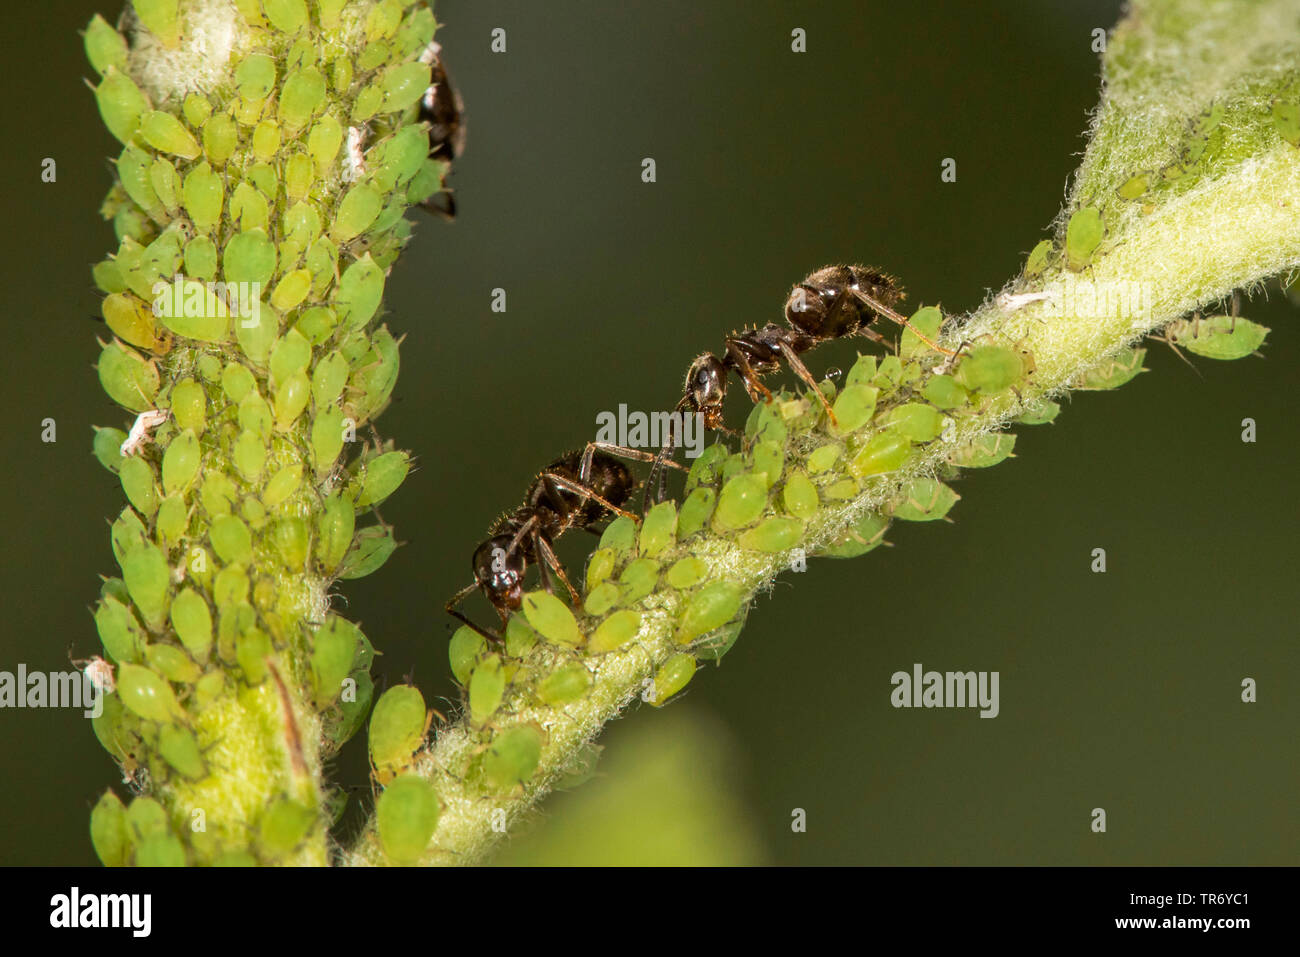 brown ant (Lasius brunneus), brown ant milking aphids in a colony on an apple tree twig, Germany, Bavaria, Isental Stock Photo